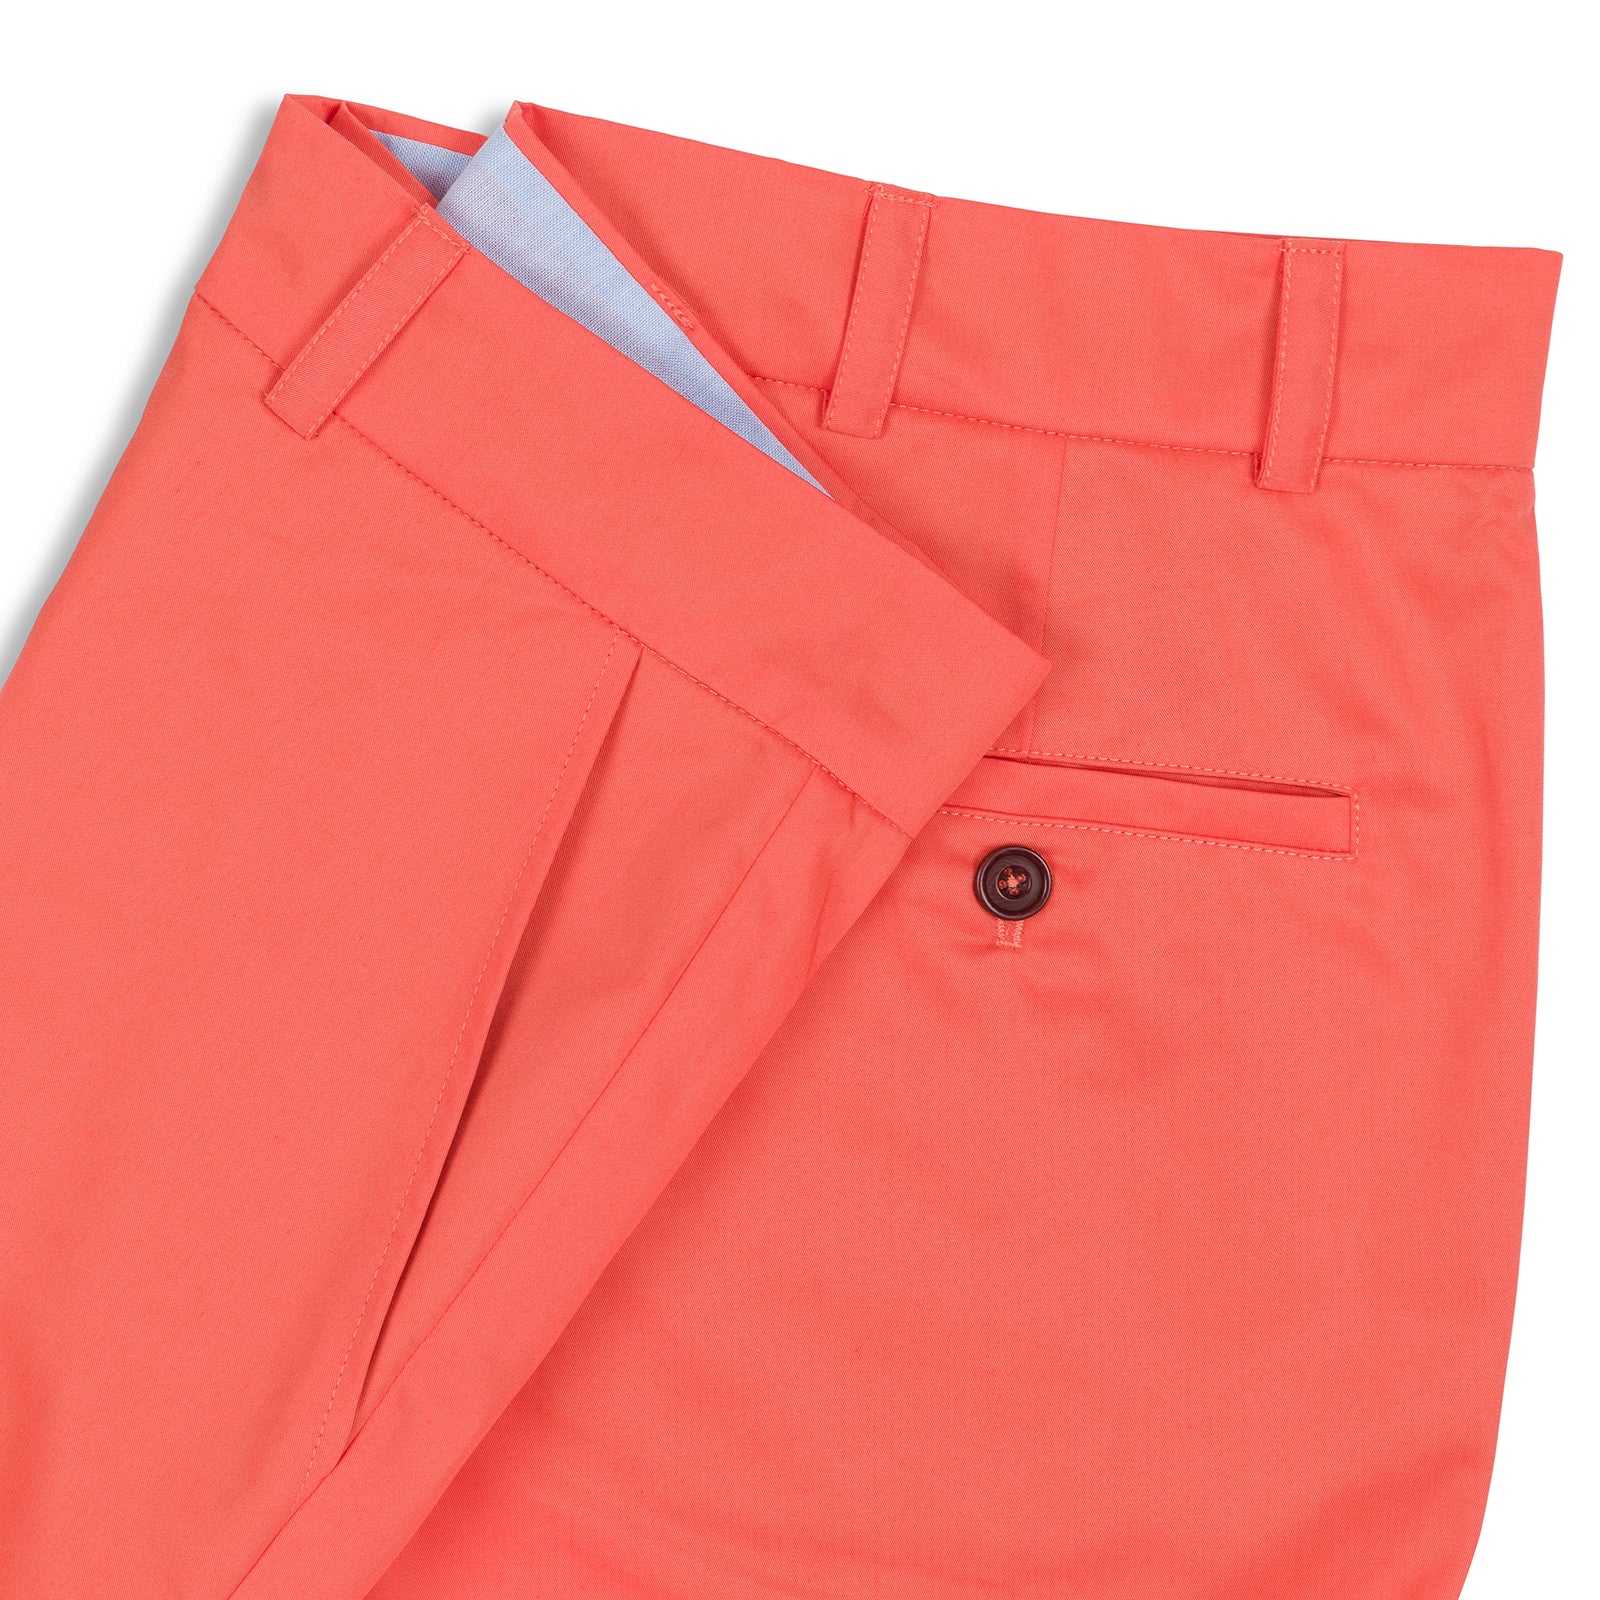 The Merchant Fox Cotton Shorts in Coral